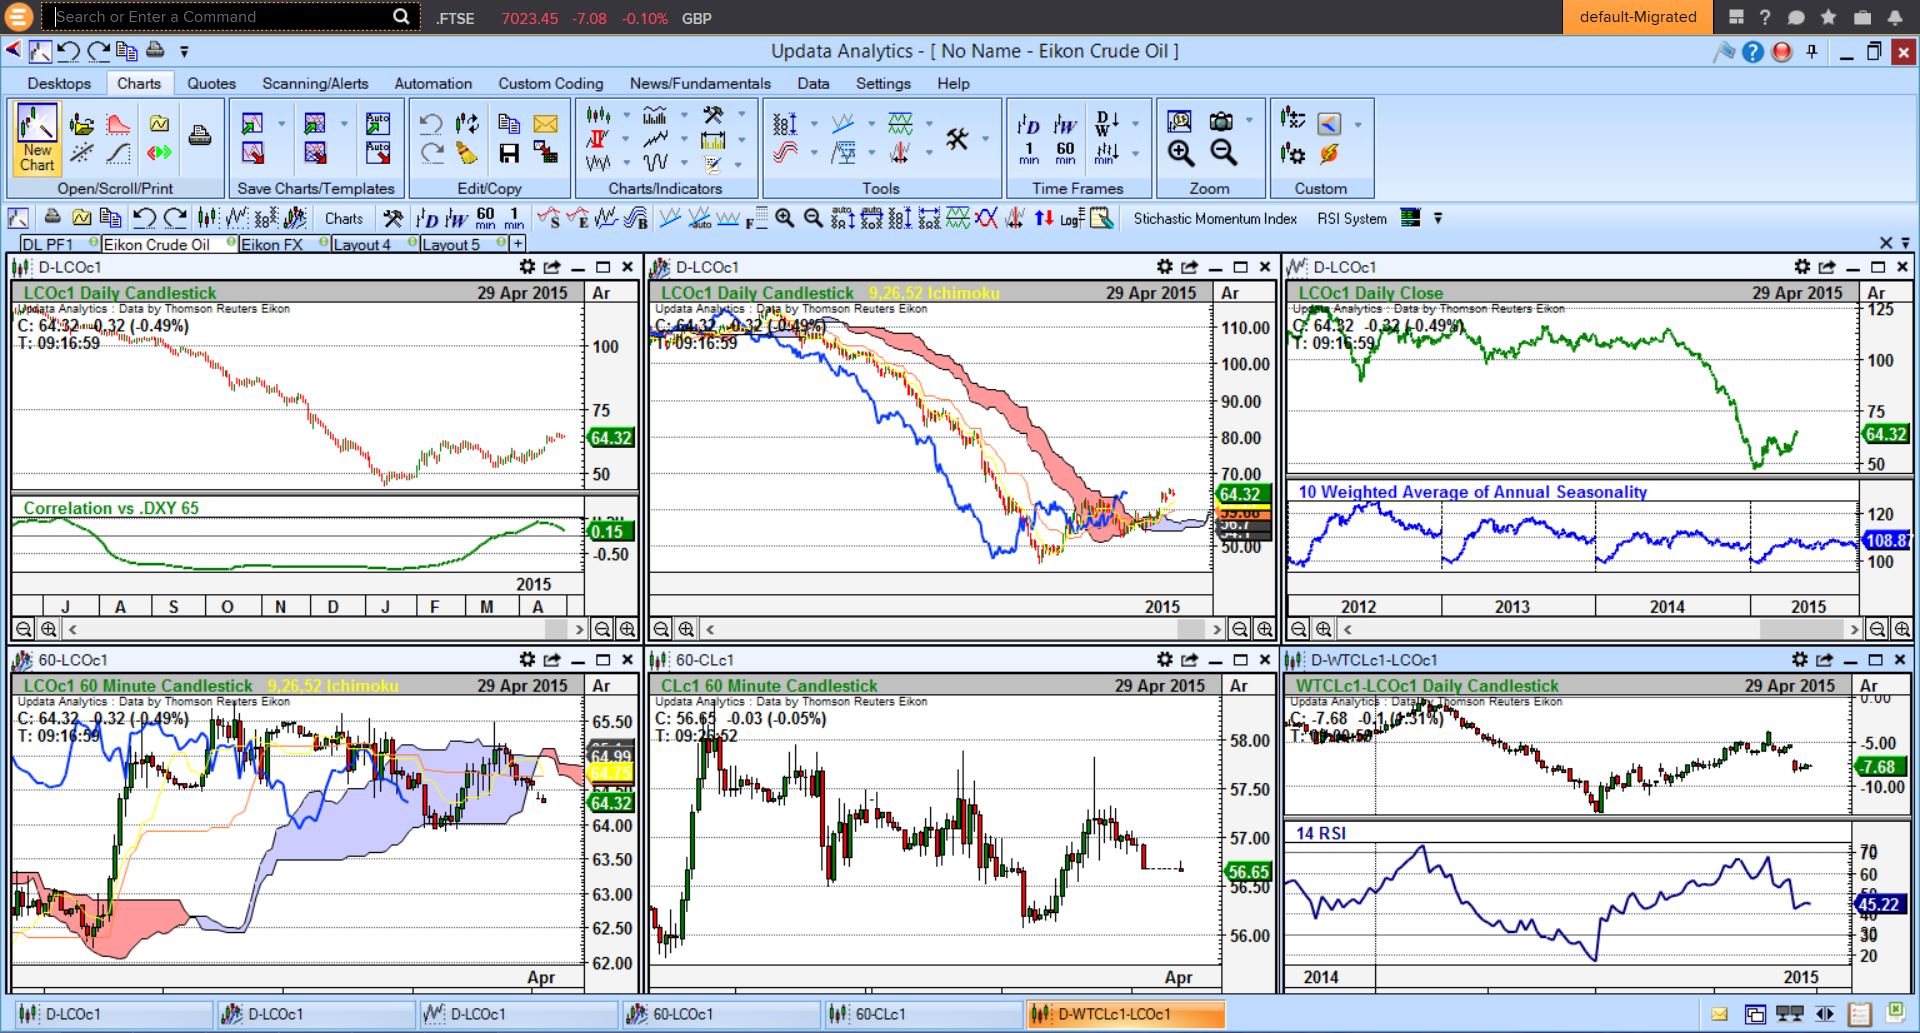 Add powerful chart analytics to Eikon with the most advanced technical analysis you'll find